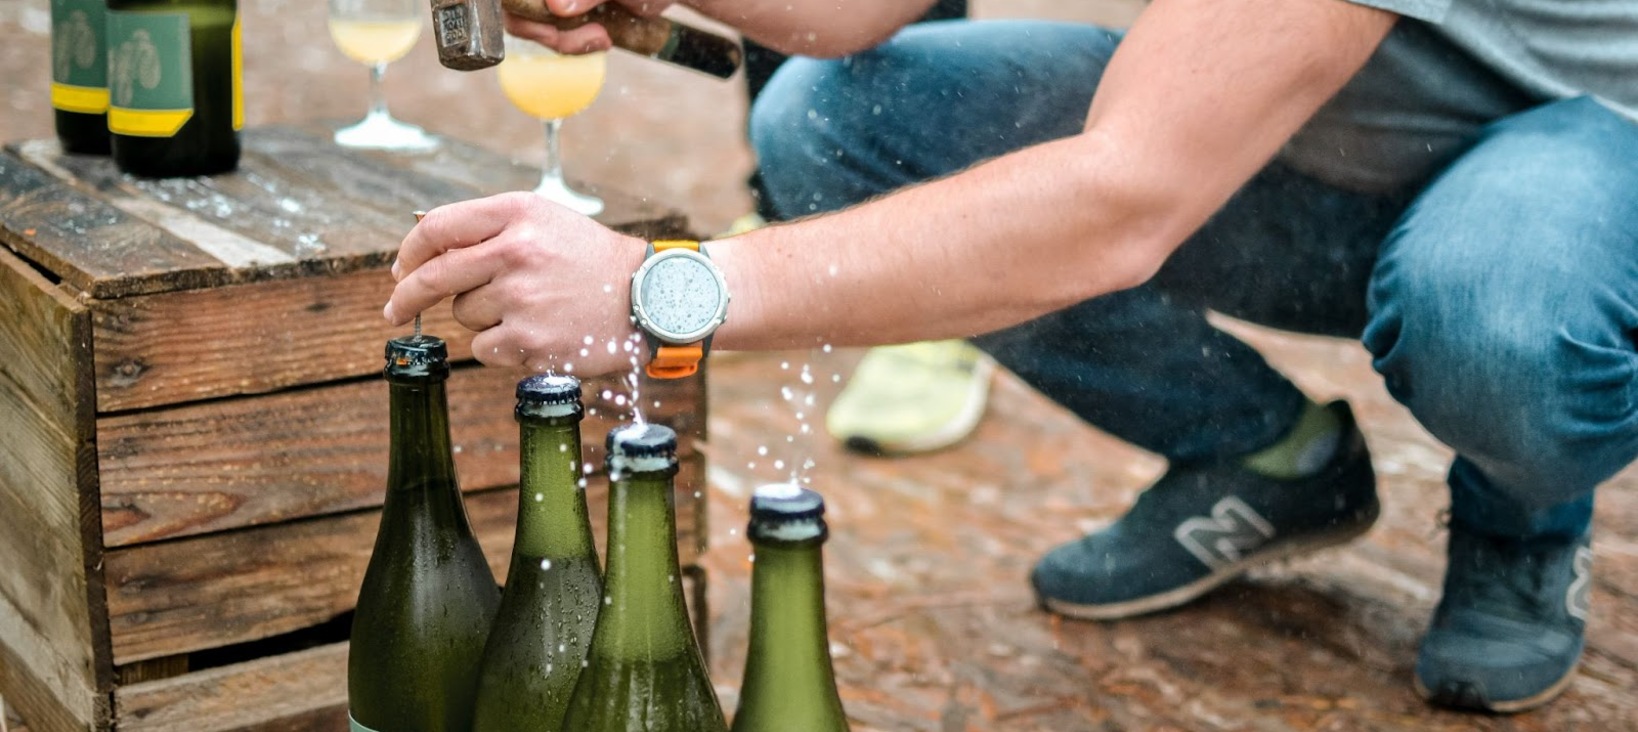 Photo of a person opening bottles of sparkling wine with a hammer and nail.